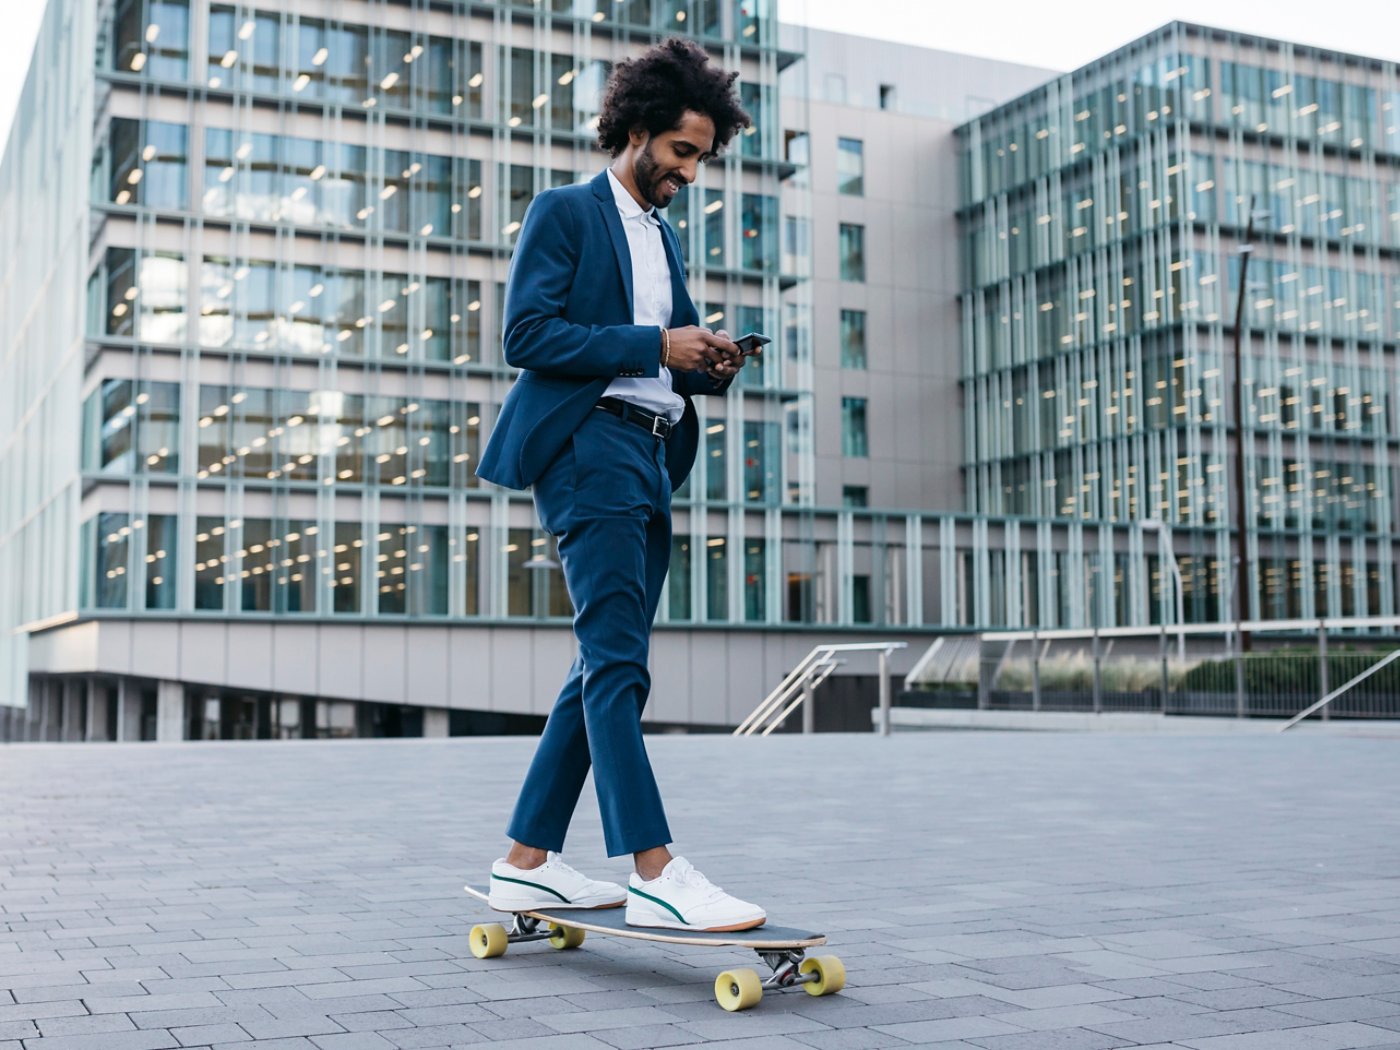 Spain, Barcelona, young businessman riding skateboard and using cell phone in the city